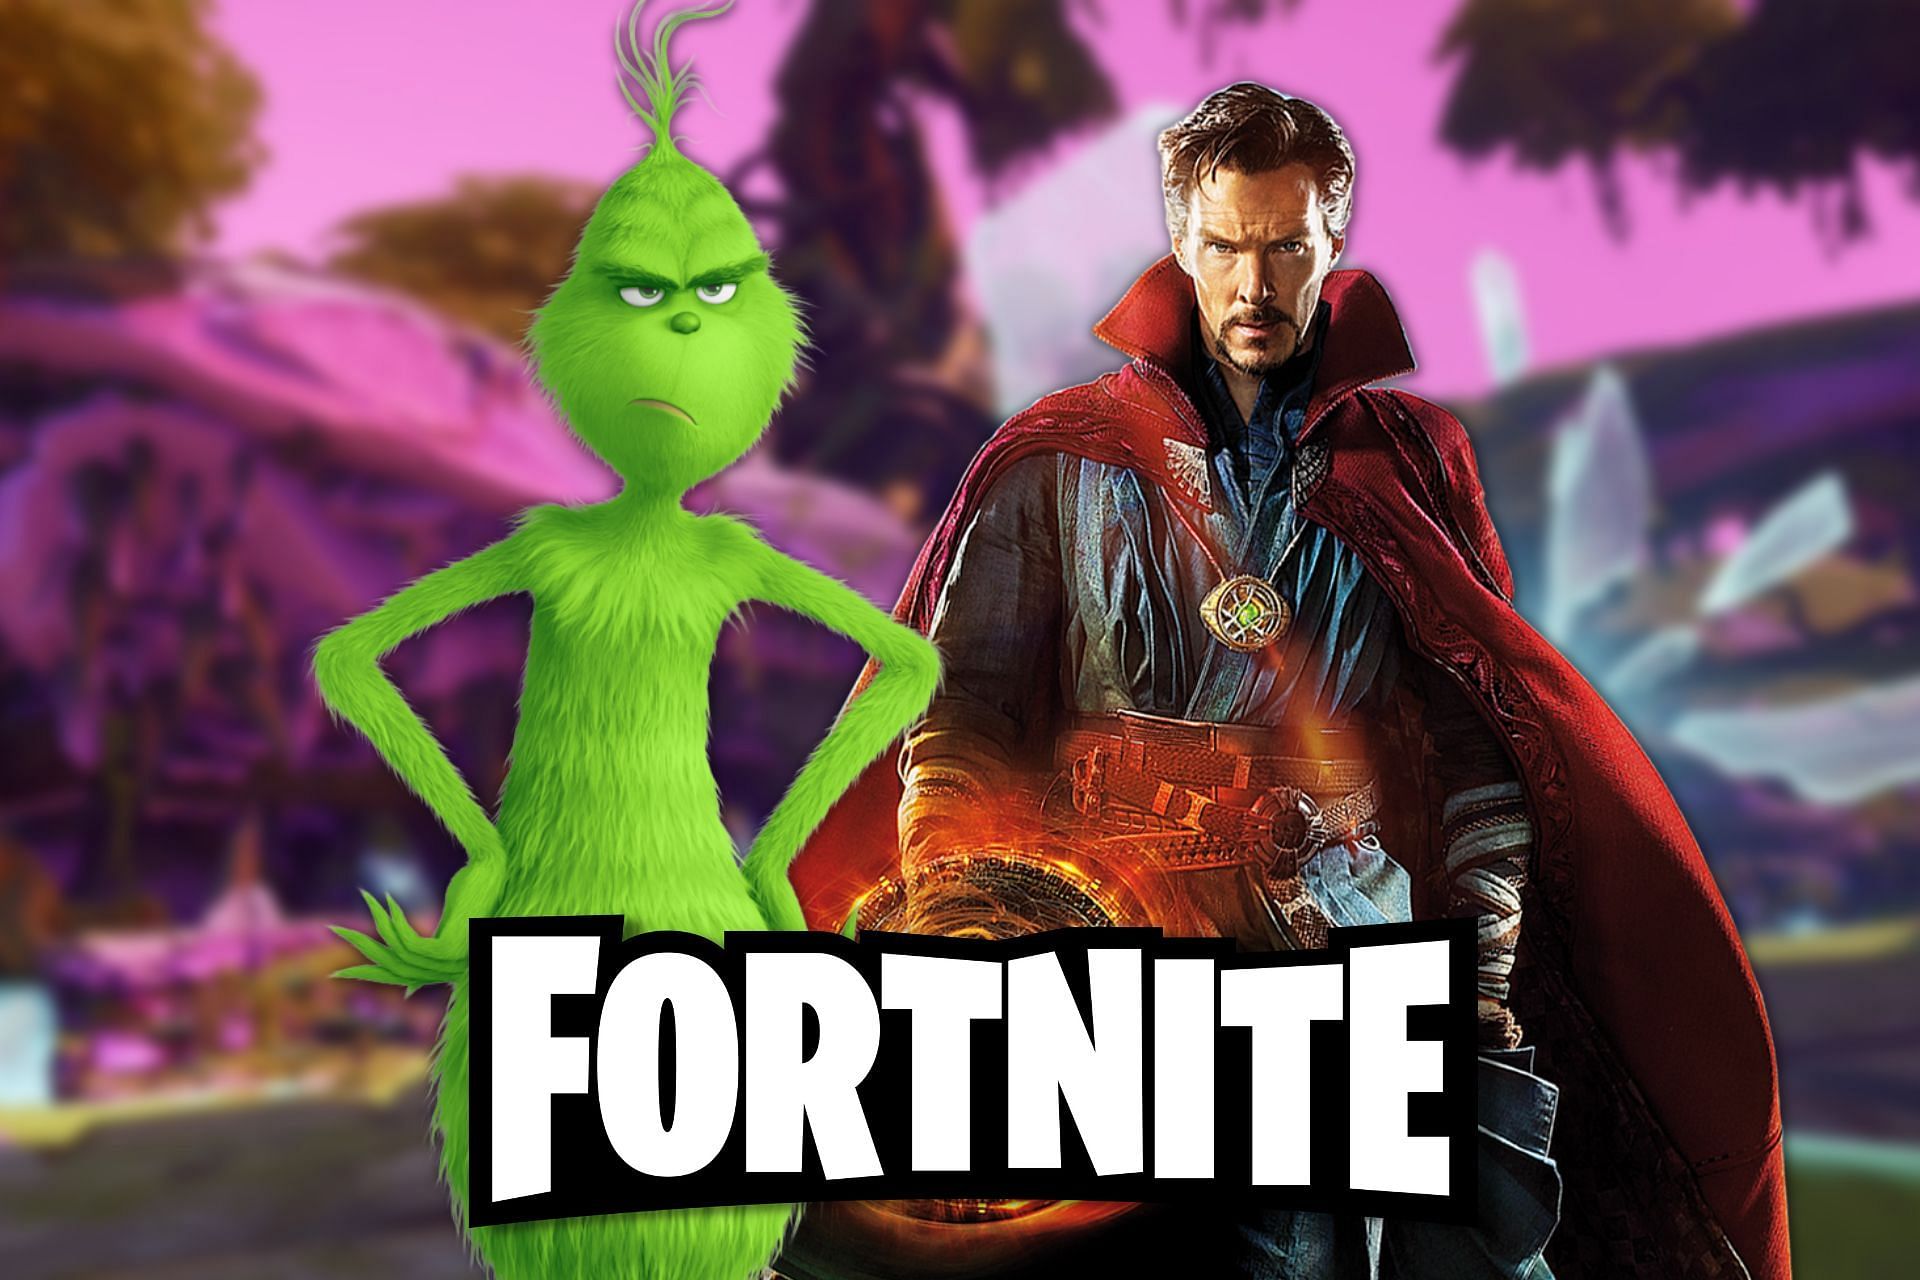 Fortnite Chapter 2 Season 9 is all set to feature Dr. Strange and Grinch, according to the leaks (Image via Sportskeeda)